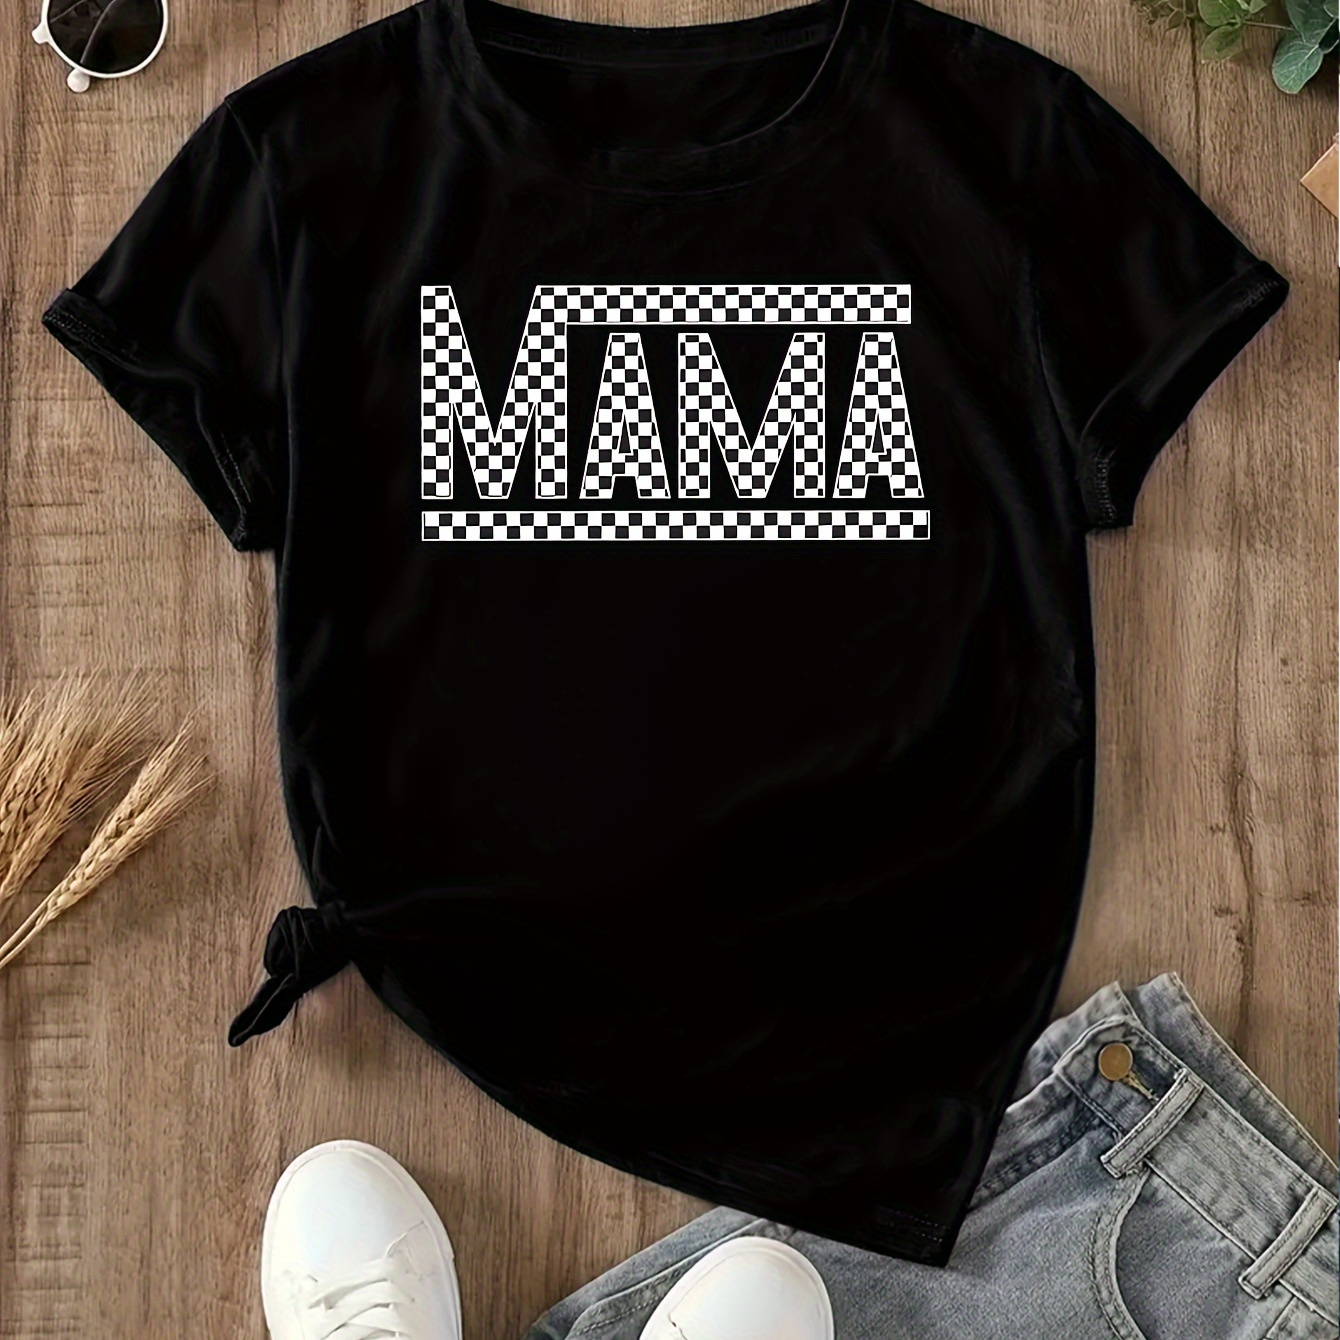 

Mama Letter & Checkerboard Print Casual T-shirt, Round Neck Short Sleeves Versatile Sports Tee, Women's Comfy Tops